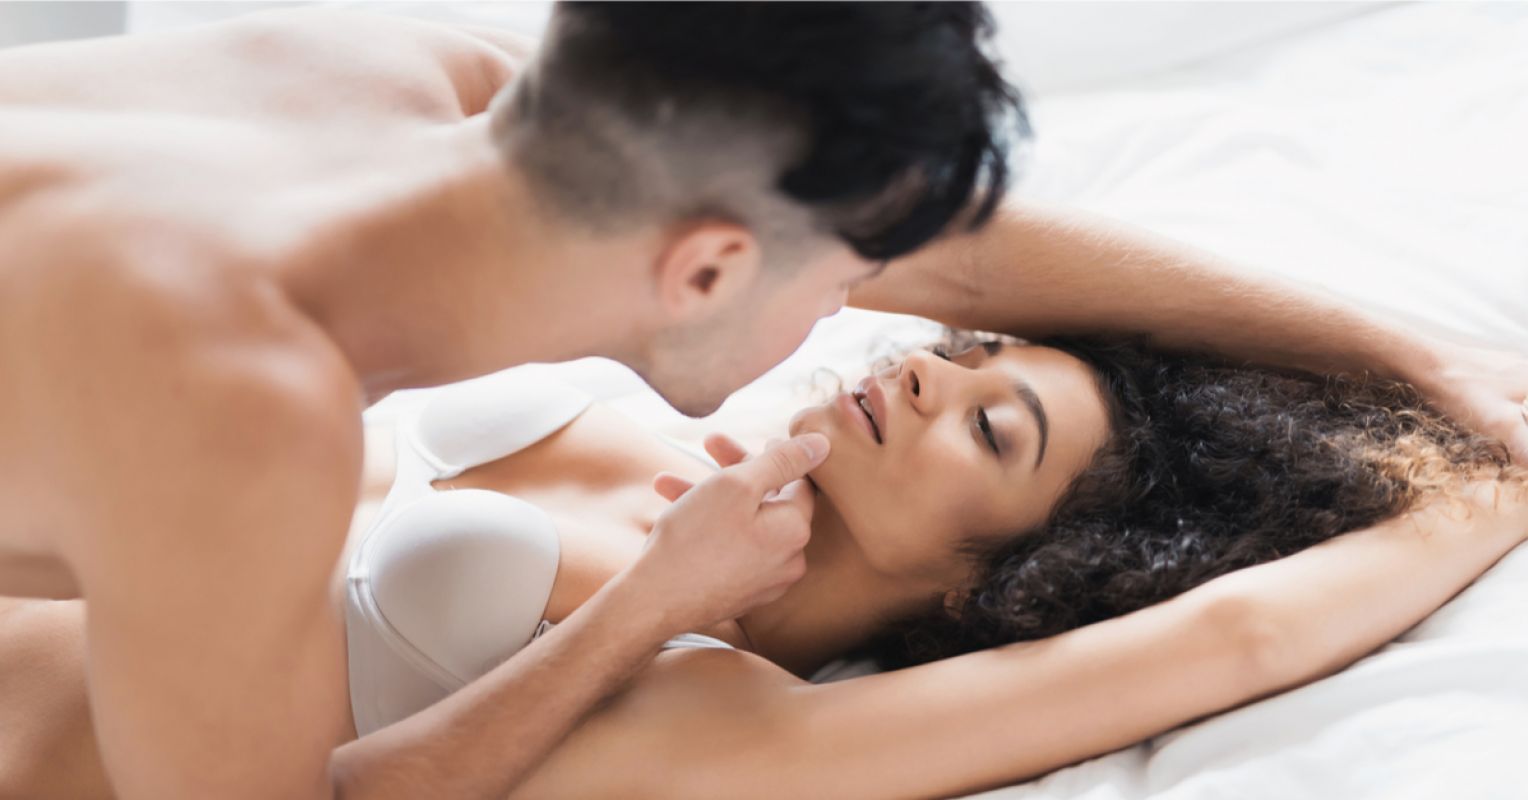 5 Key New Findings About the Female Orgasm Psychology Today